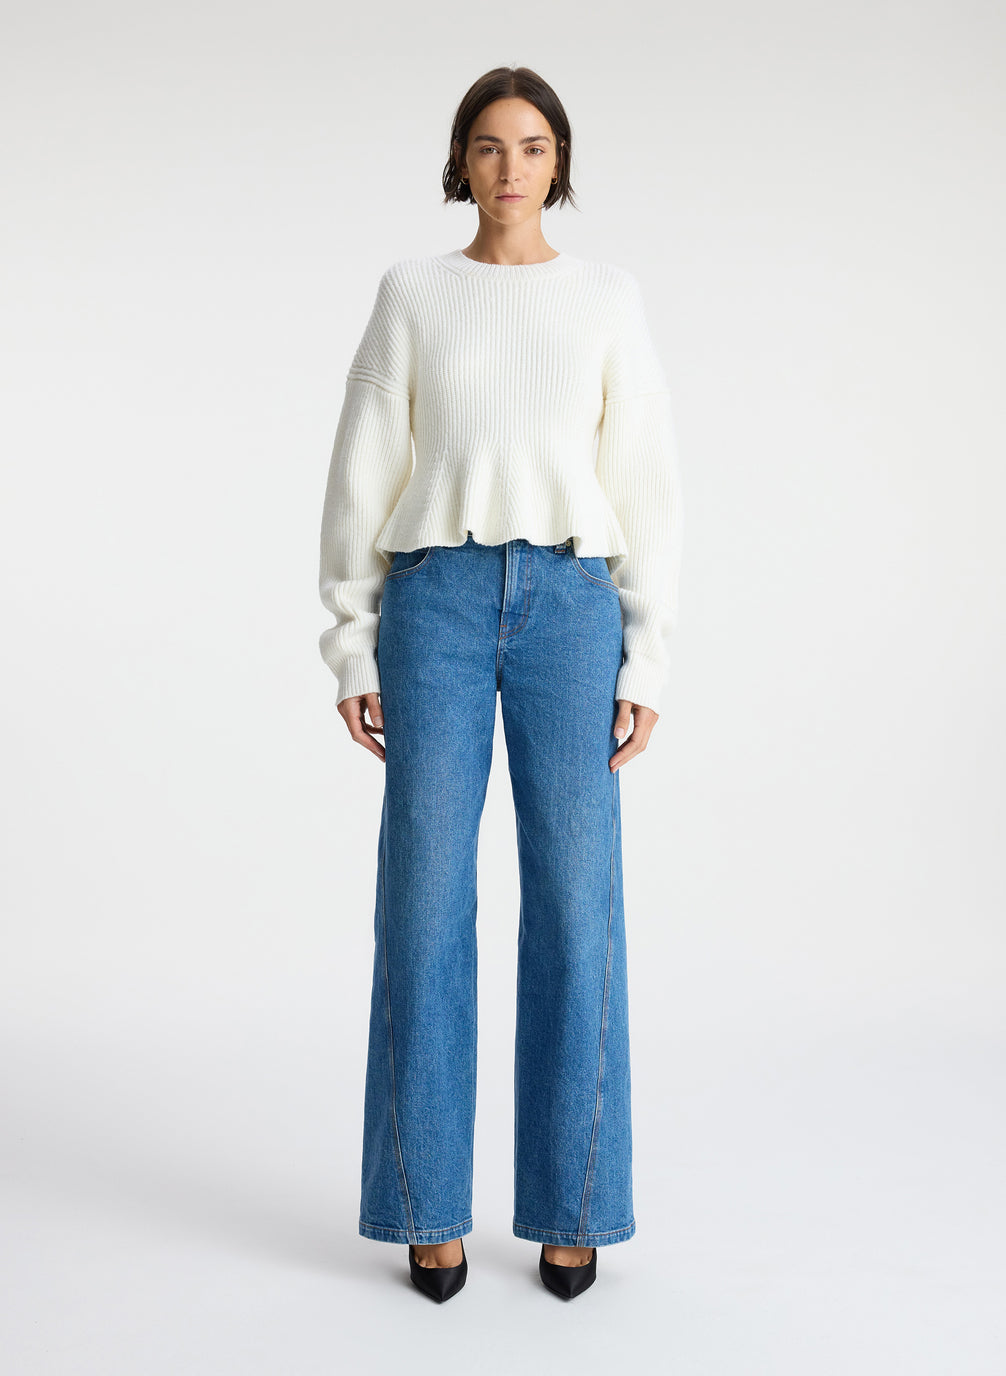 front view of woman wearing white peplum sweater and medium blue wash denim jeans